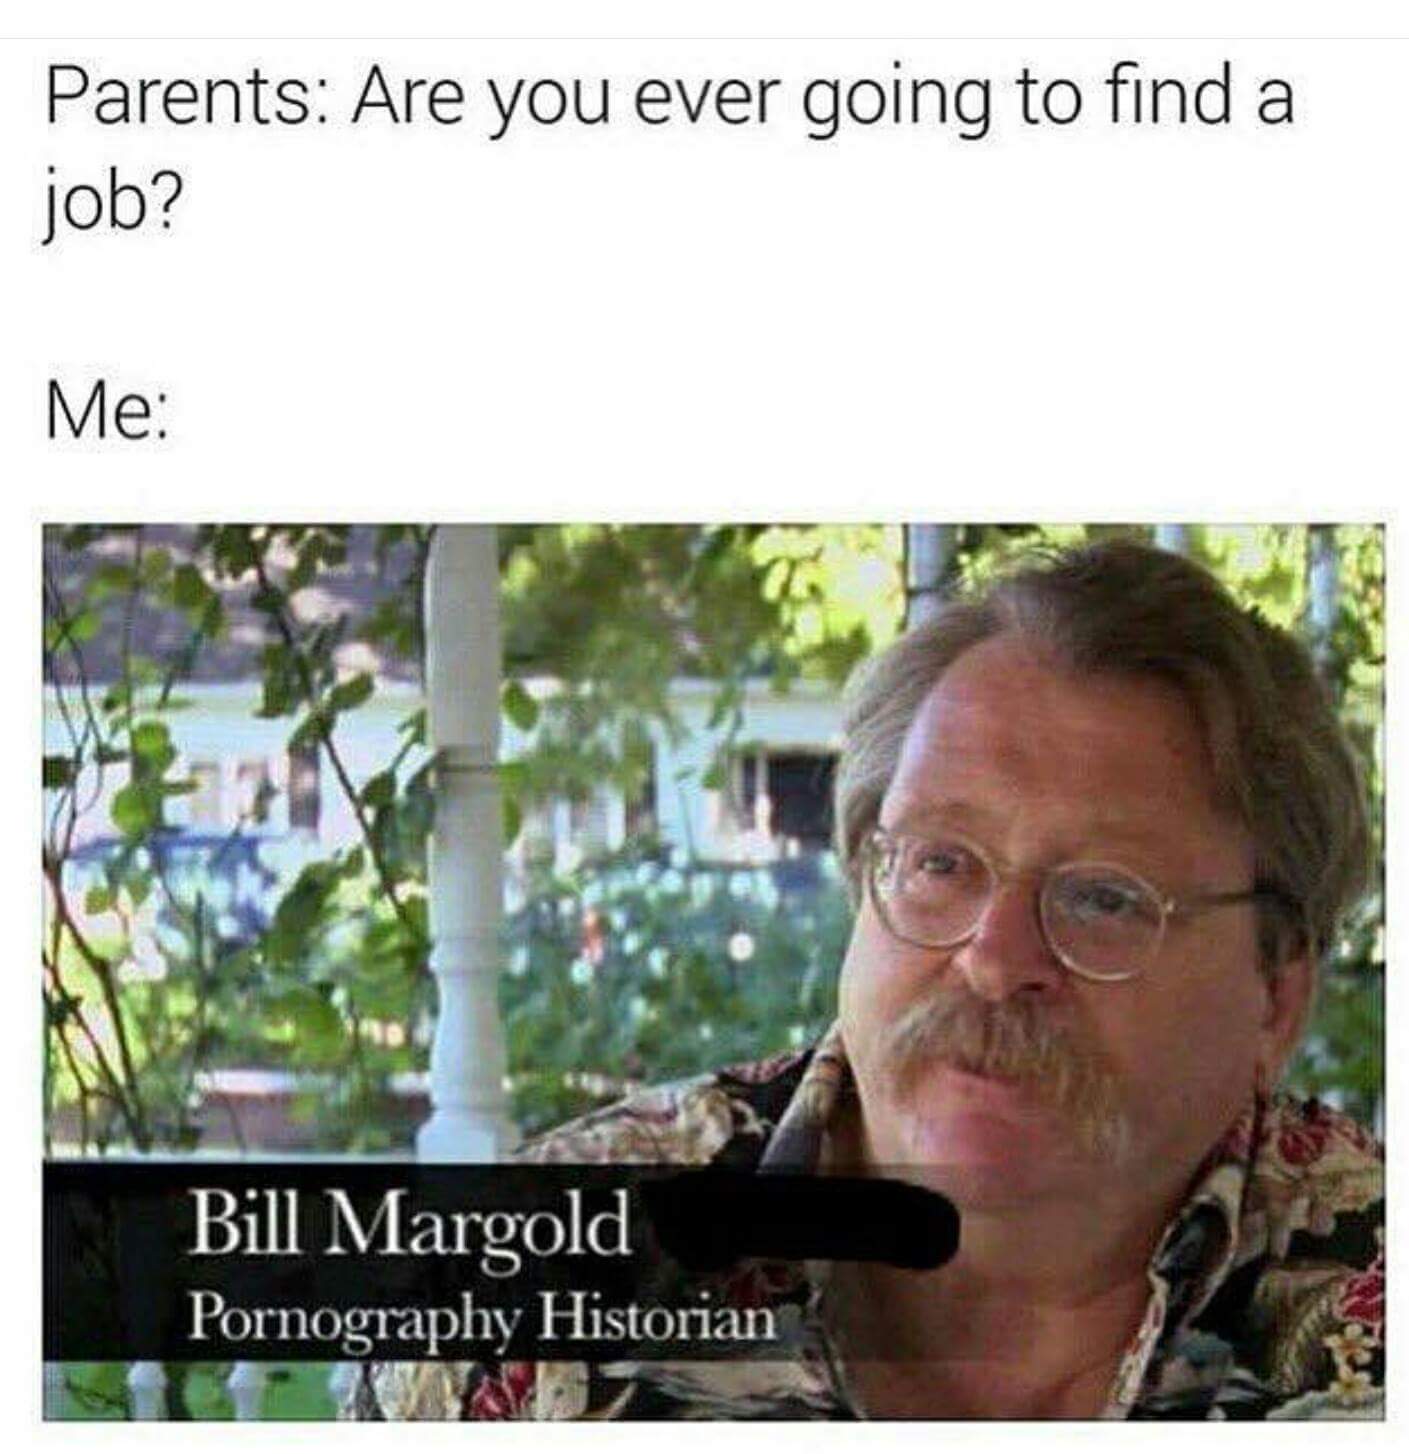 pornography historian - Parents Are you ever going to find a job? Me Bill Margold Pornography Historian